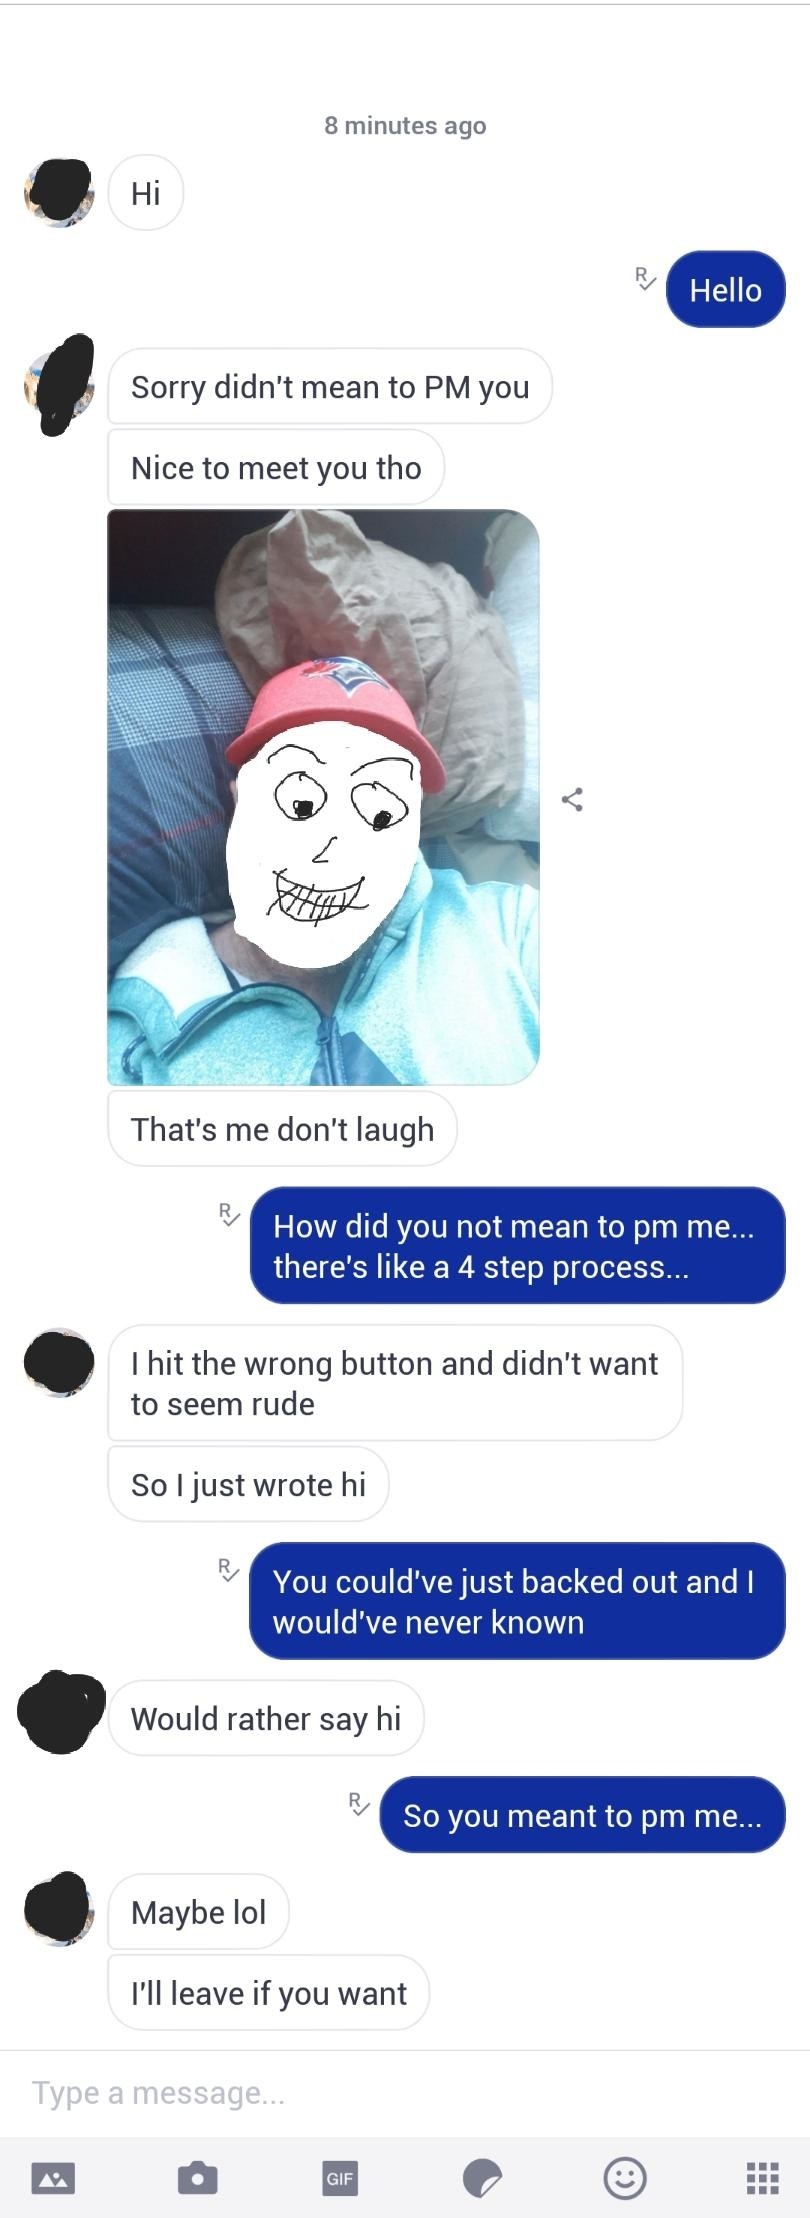 Person sends a PM with a photo, saying they didn&#x27;t mean to PM the person but hi anyway, and when they&#x27;re asked how they could do a &quot;four-step process&quot; accidentally, they say they hit the wrong button